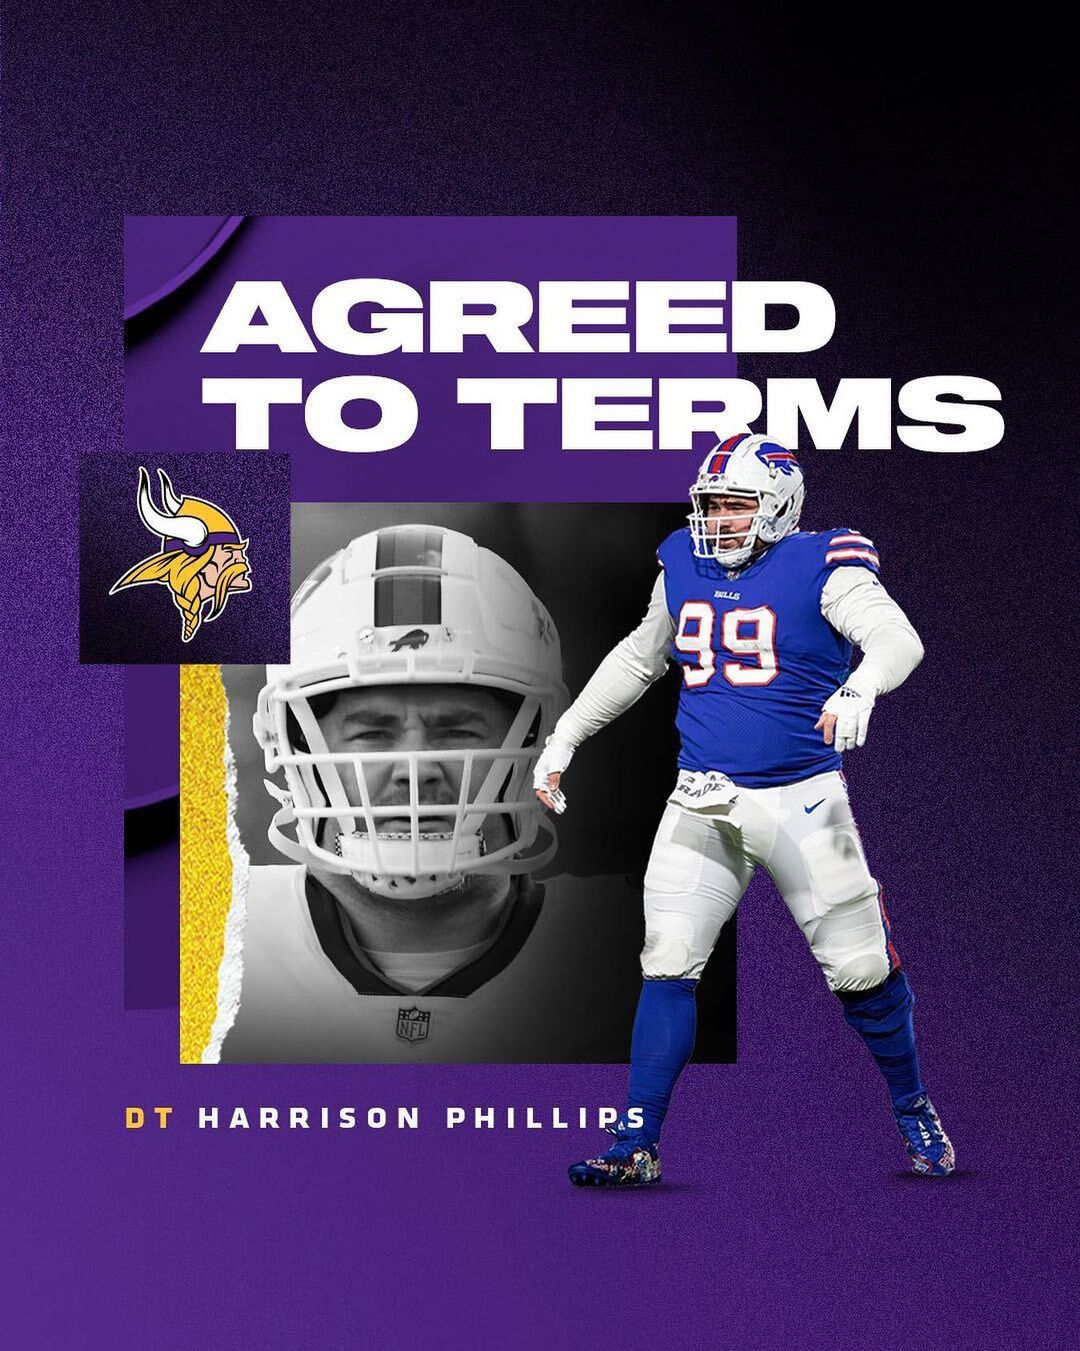 The #Vikings have agreed to terms with DT Harrison Phillips. ...